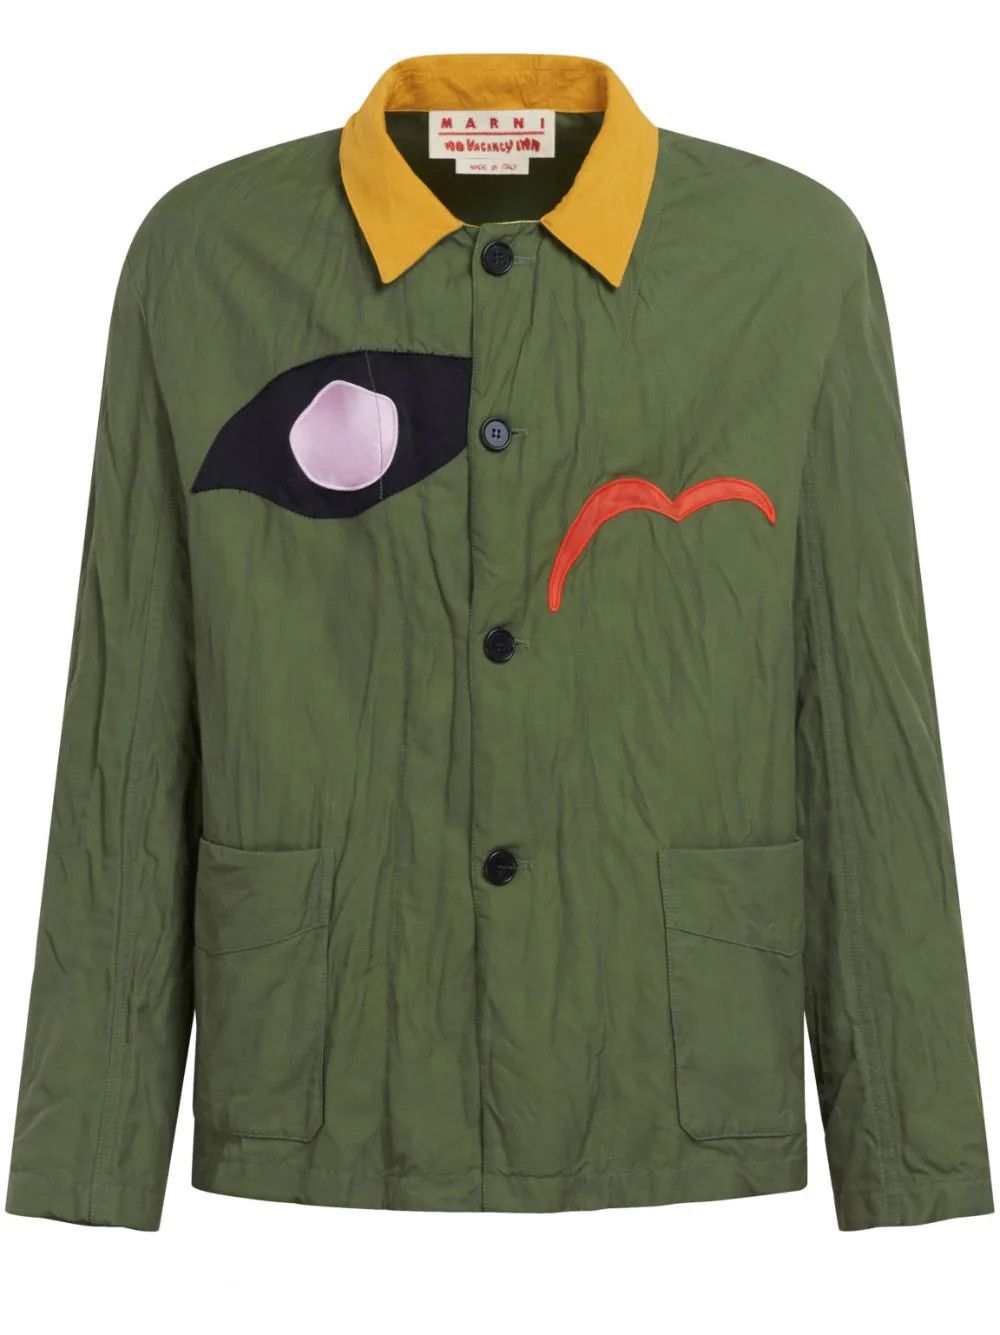 Marni o1s1v1r1oon Cotton Linen Covert Jacket in Stone Green | Grailed